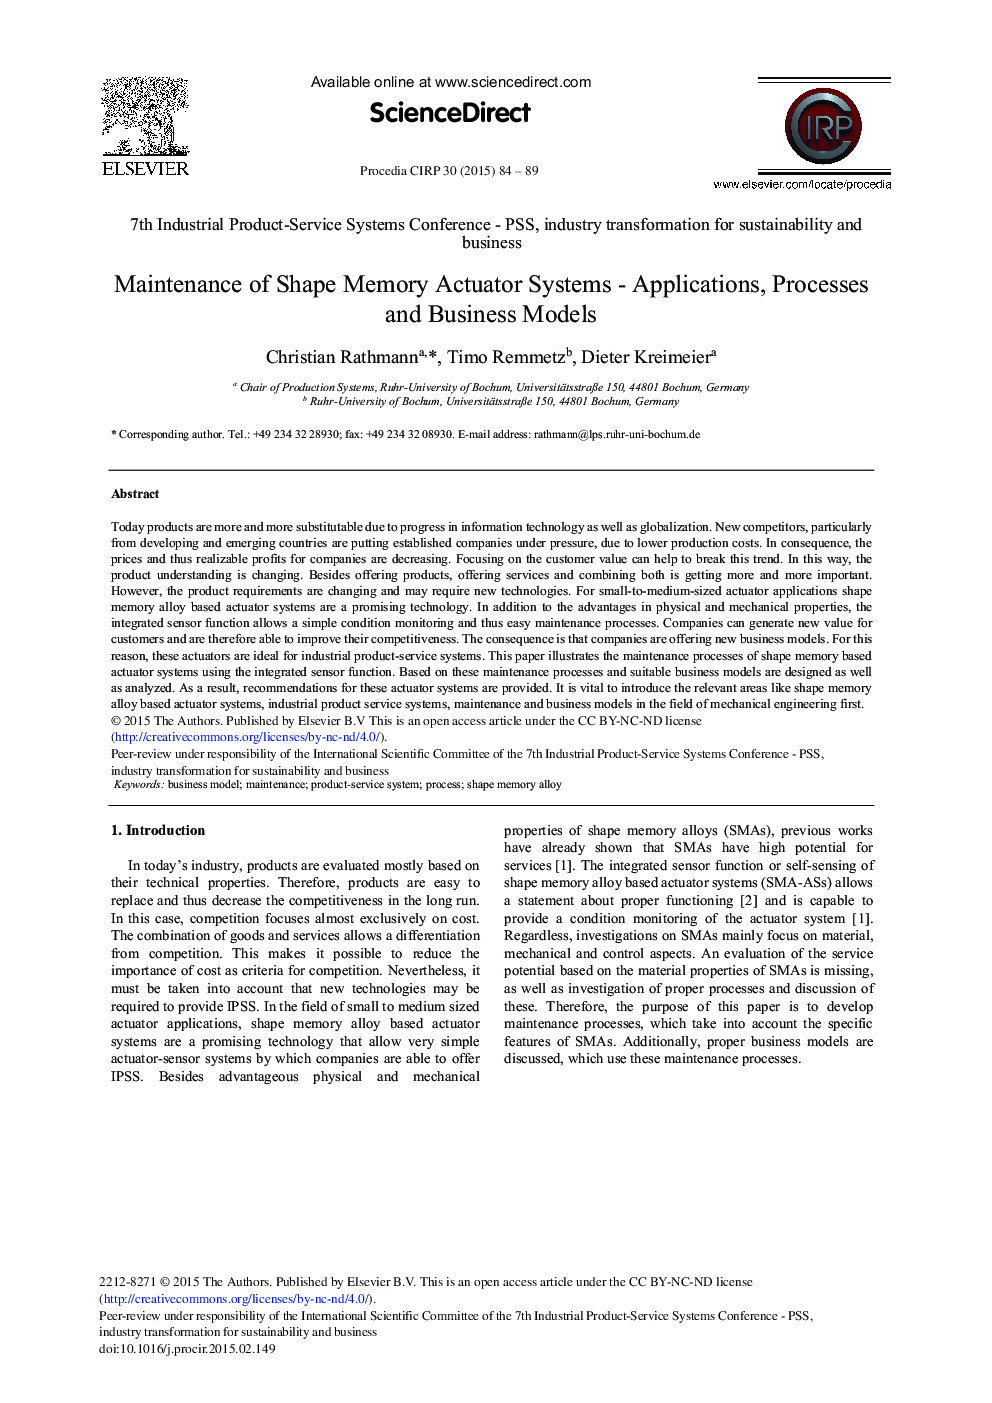 Maintenance of Shape Memory Actuator Systems - Applications, Processes and Business Models 